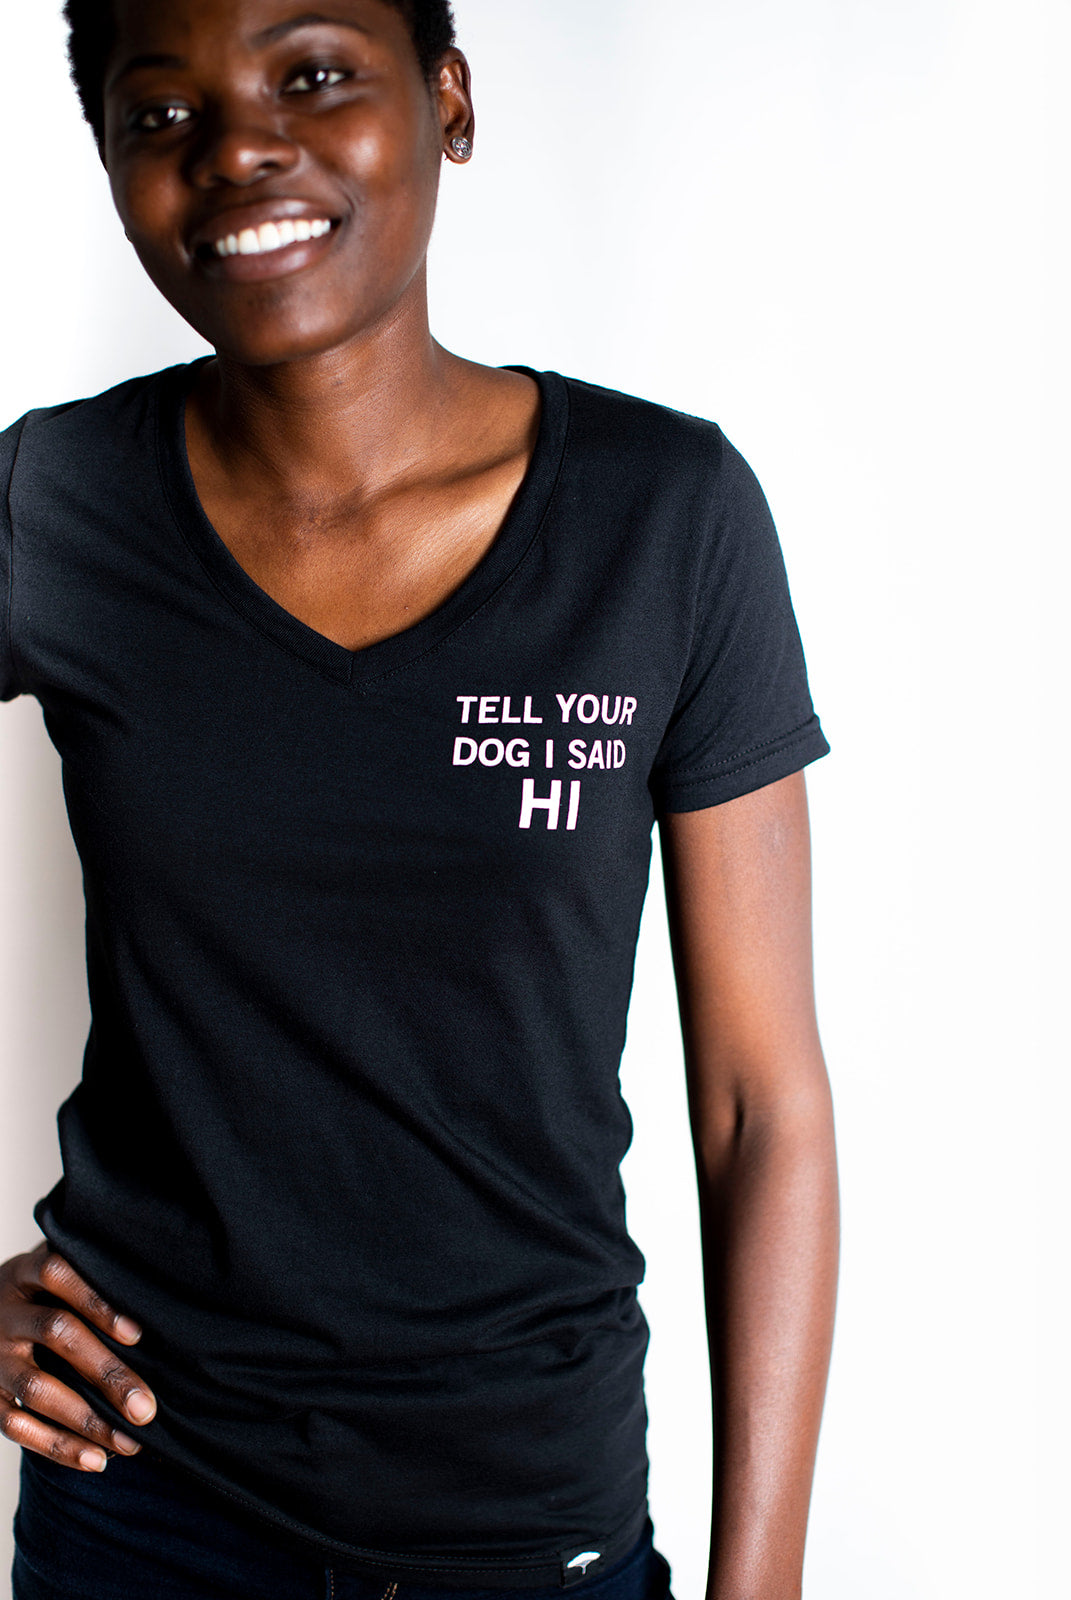 Women's organic short sleeve black t-shirt with text that reads 'Tell your dog I said HI' on front